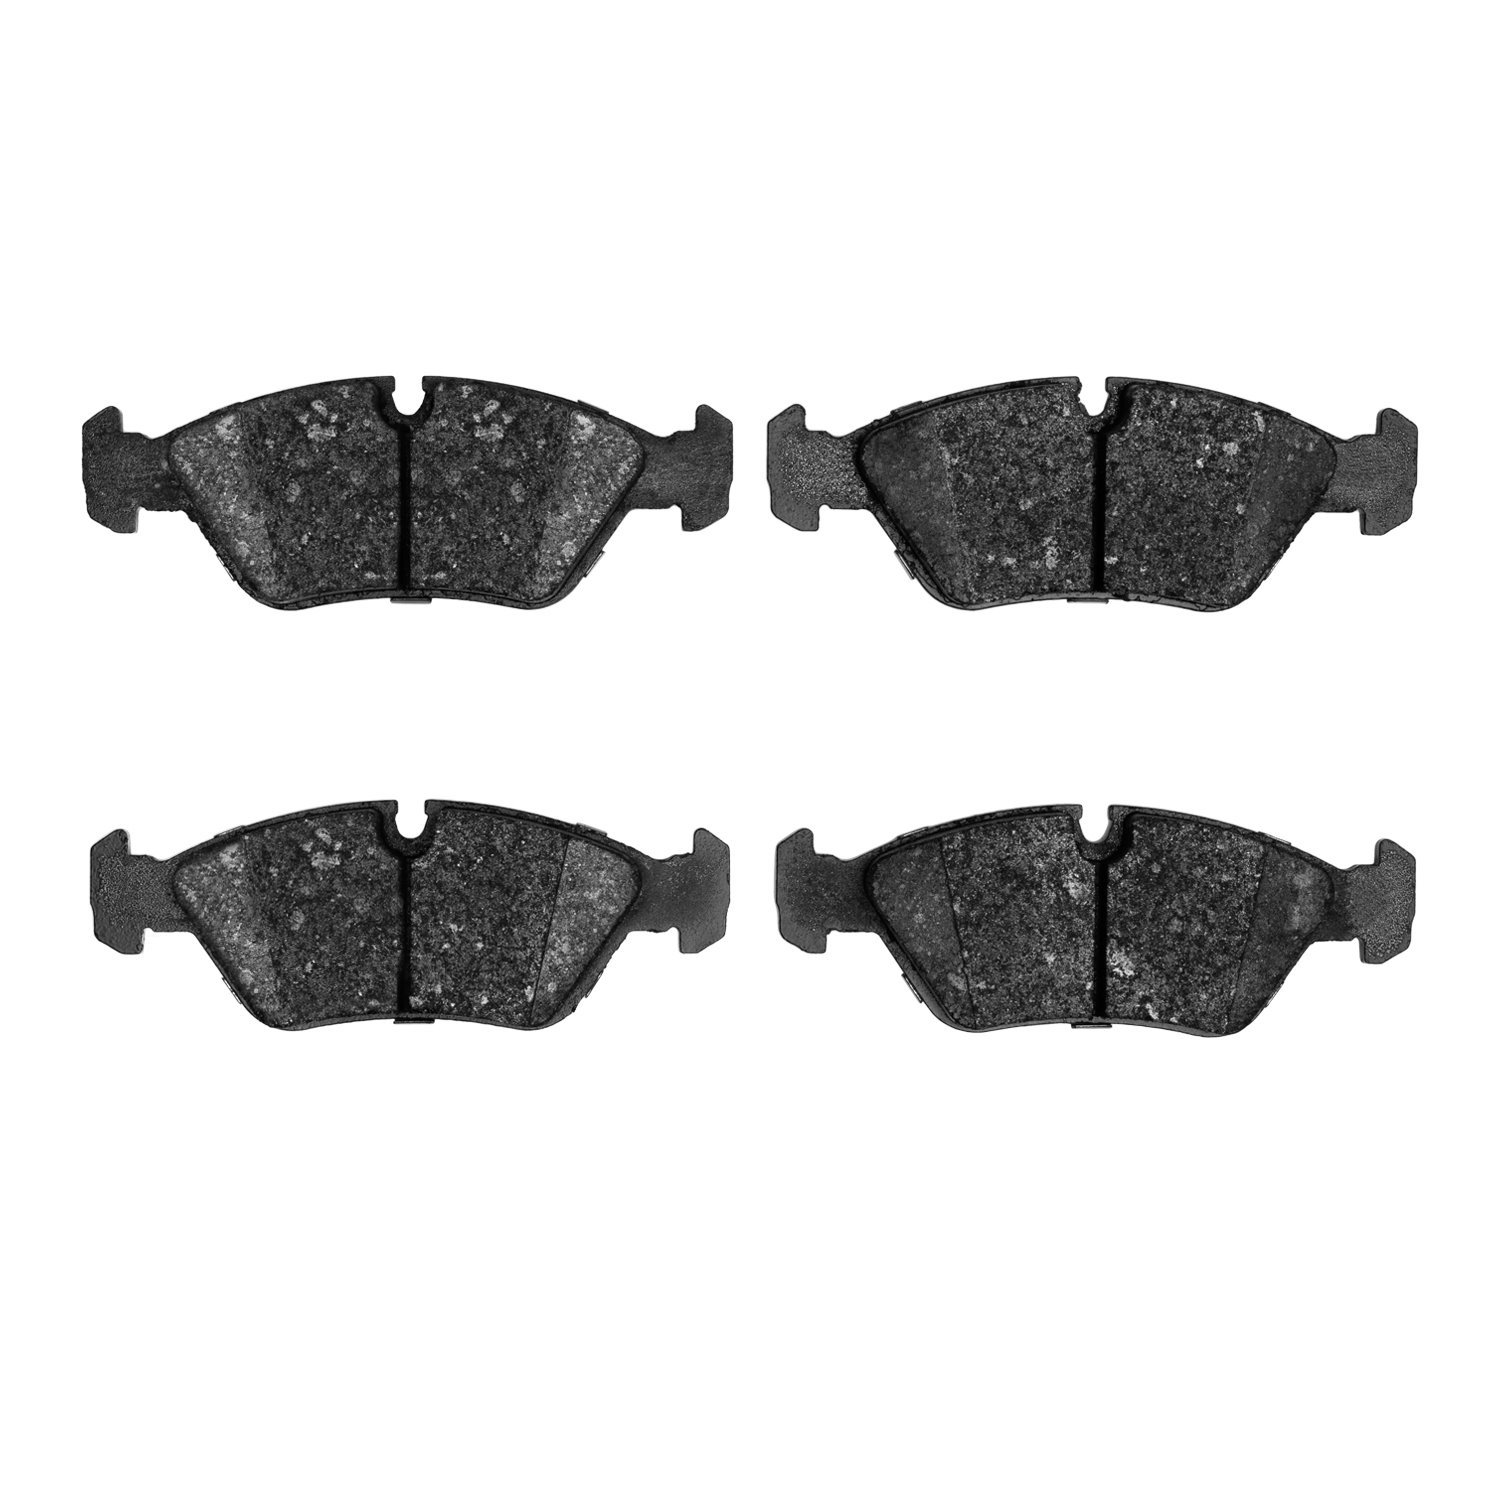 1551-0253-00 5000 Advanced Low-Metallic Brake Pads, 1982-1993 Multiple Makes/Models, Position: Front